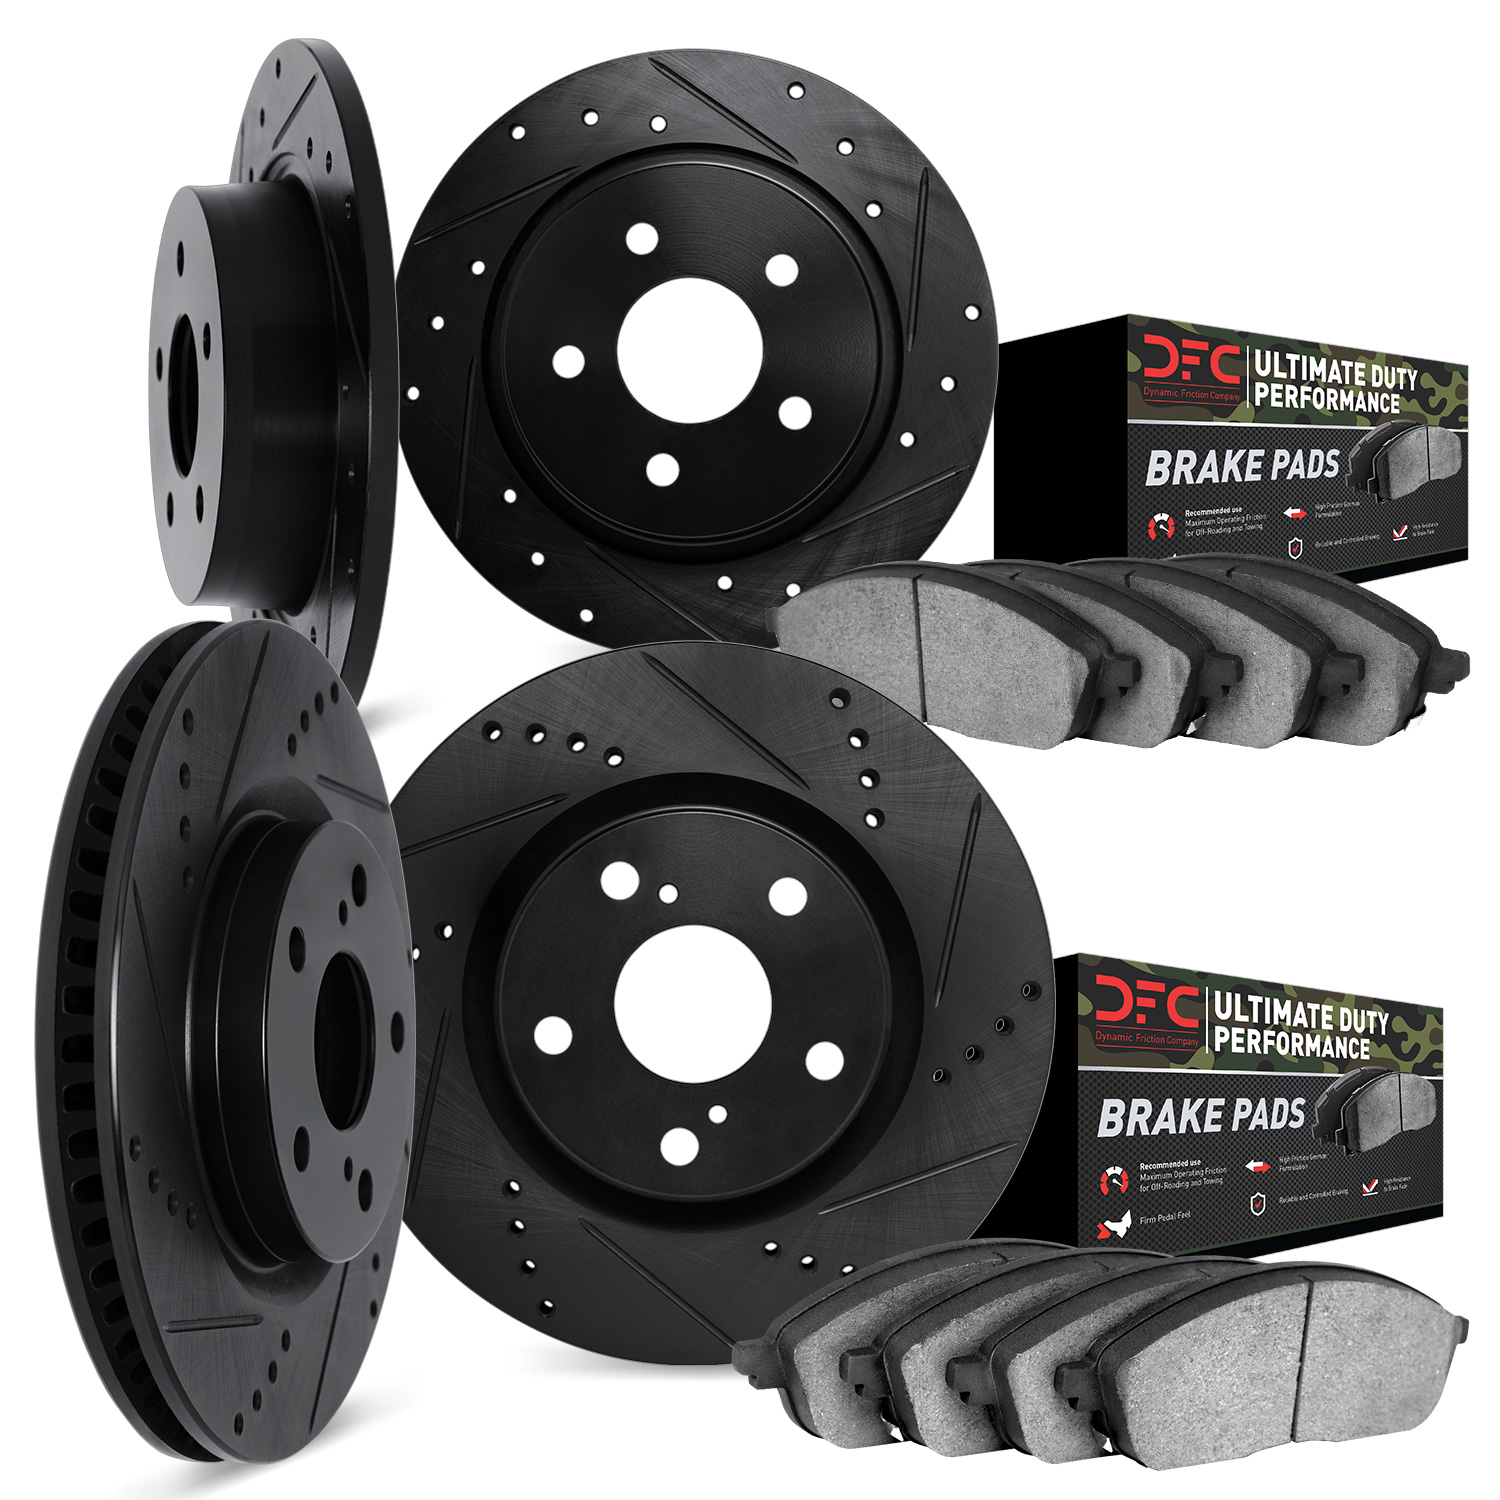 8404-42019 Drilled/Slotted Brake Rotors with Ultimate-Duty Brake Pads Kit [Black], Fits Select Mopar, Position: Front and Rear